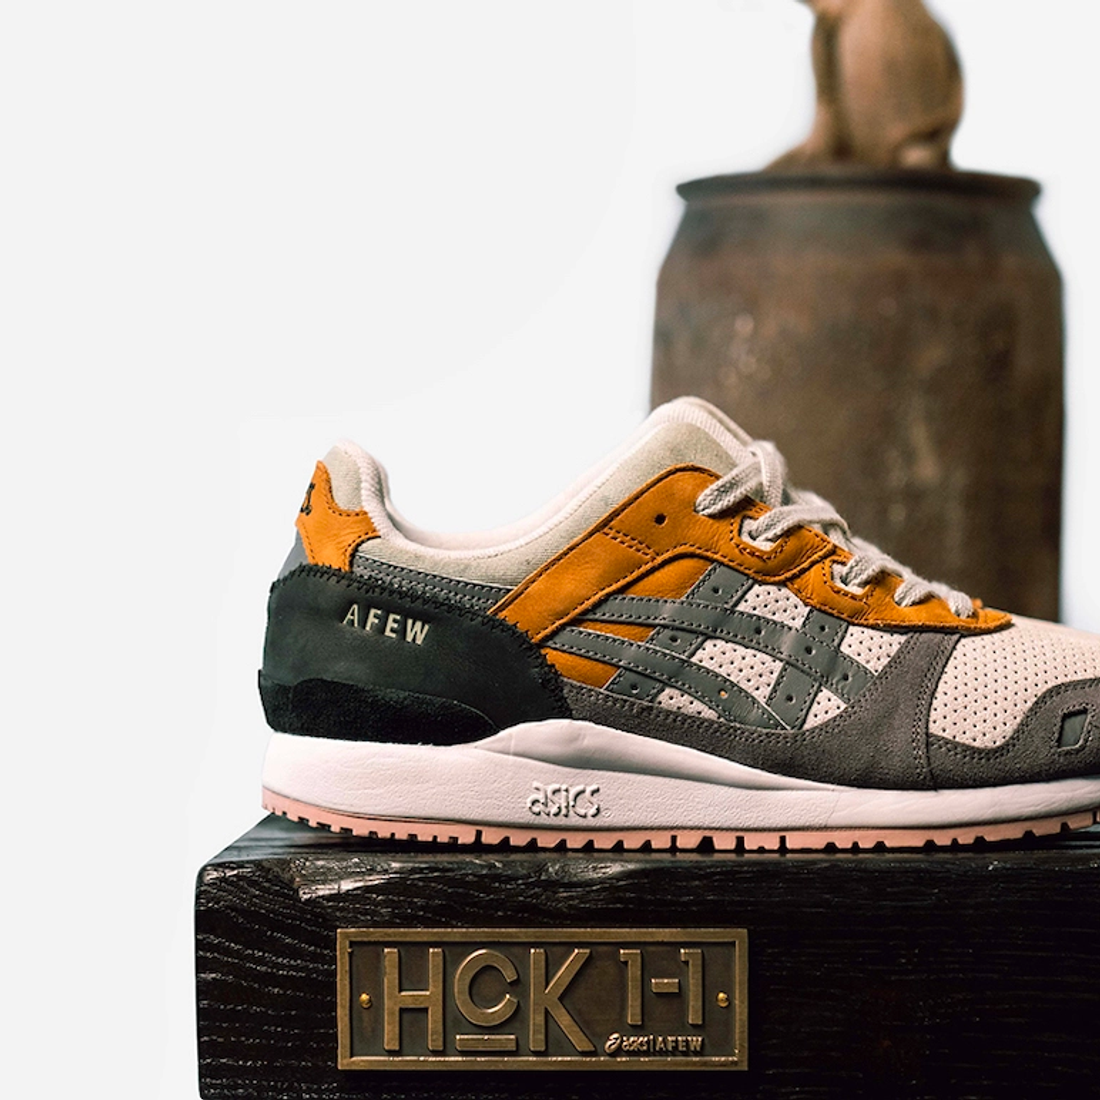 Only One Pair Exists of the Afew x ASICS GEL-Lyte III 'Beauty Imperfection CP 1/1' - Sneaker Freaker